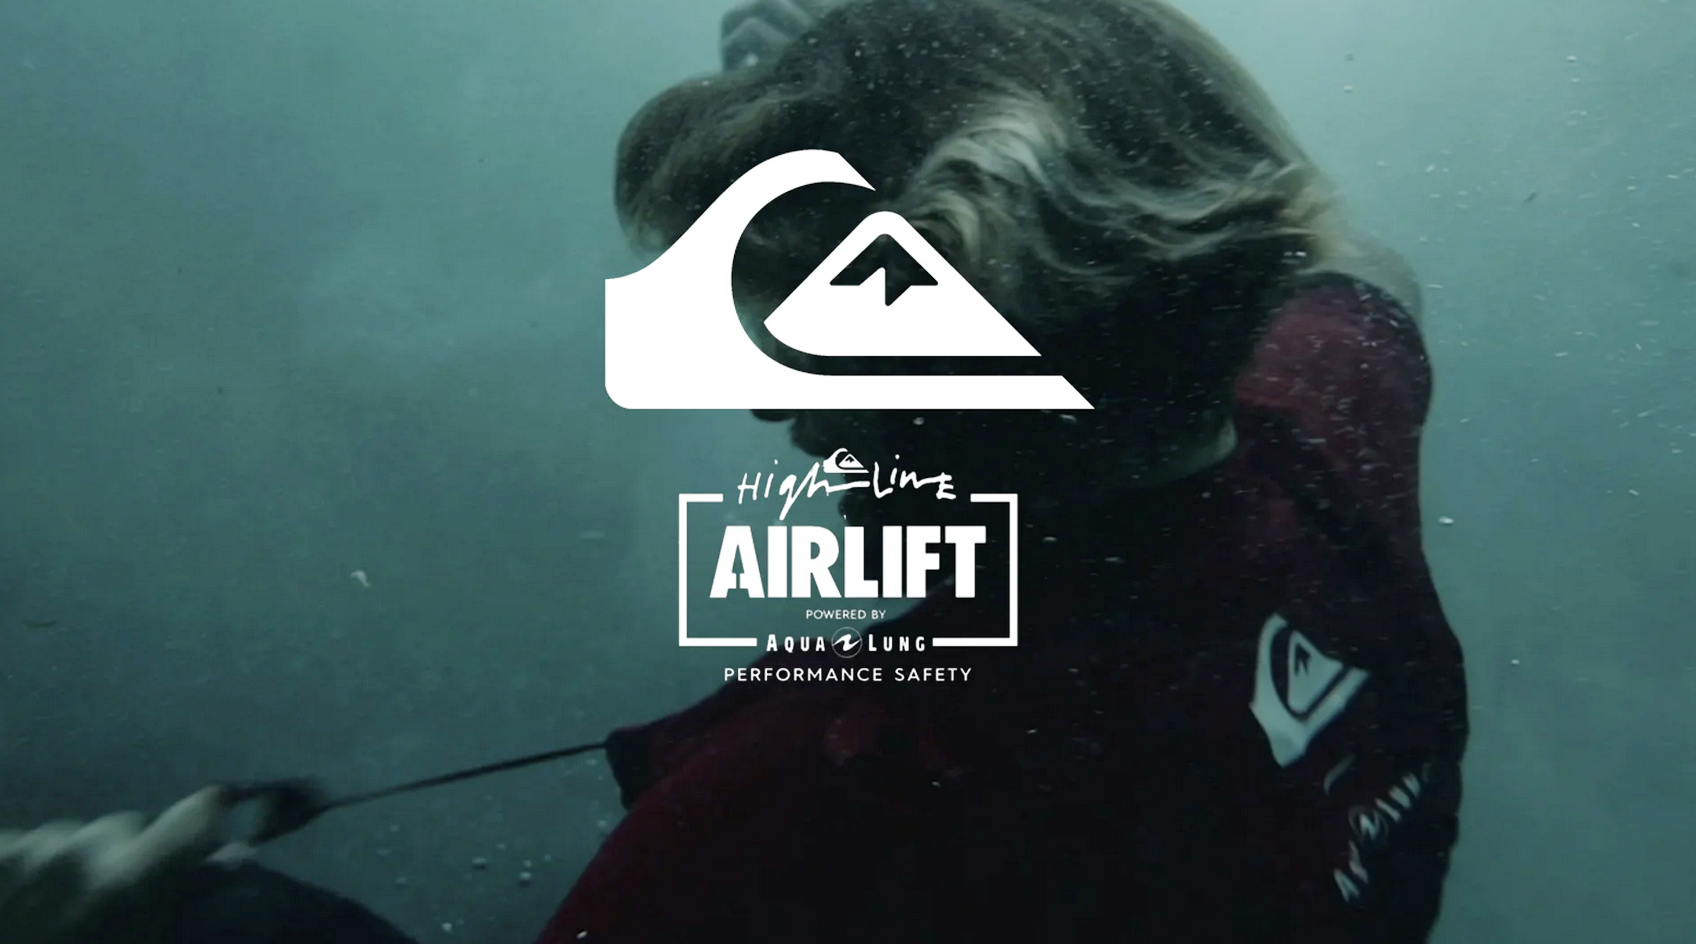 QUIKSILVER CAMPAING AIRLIFT - Rayco Cano